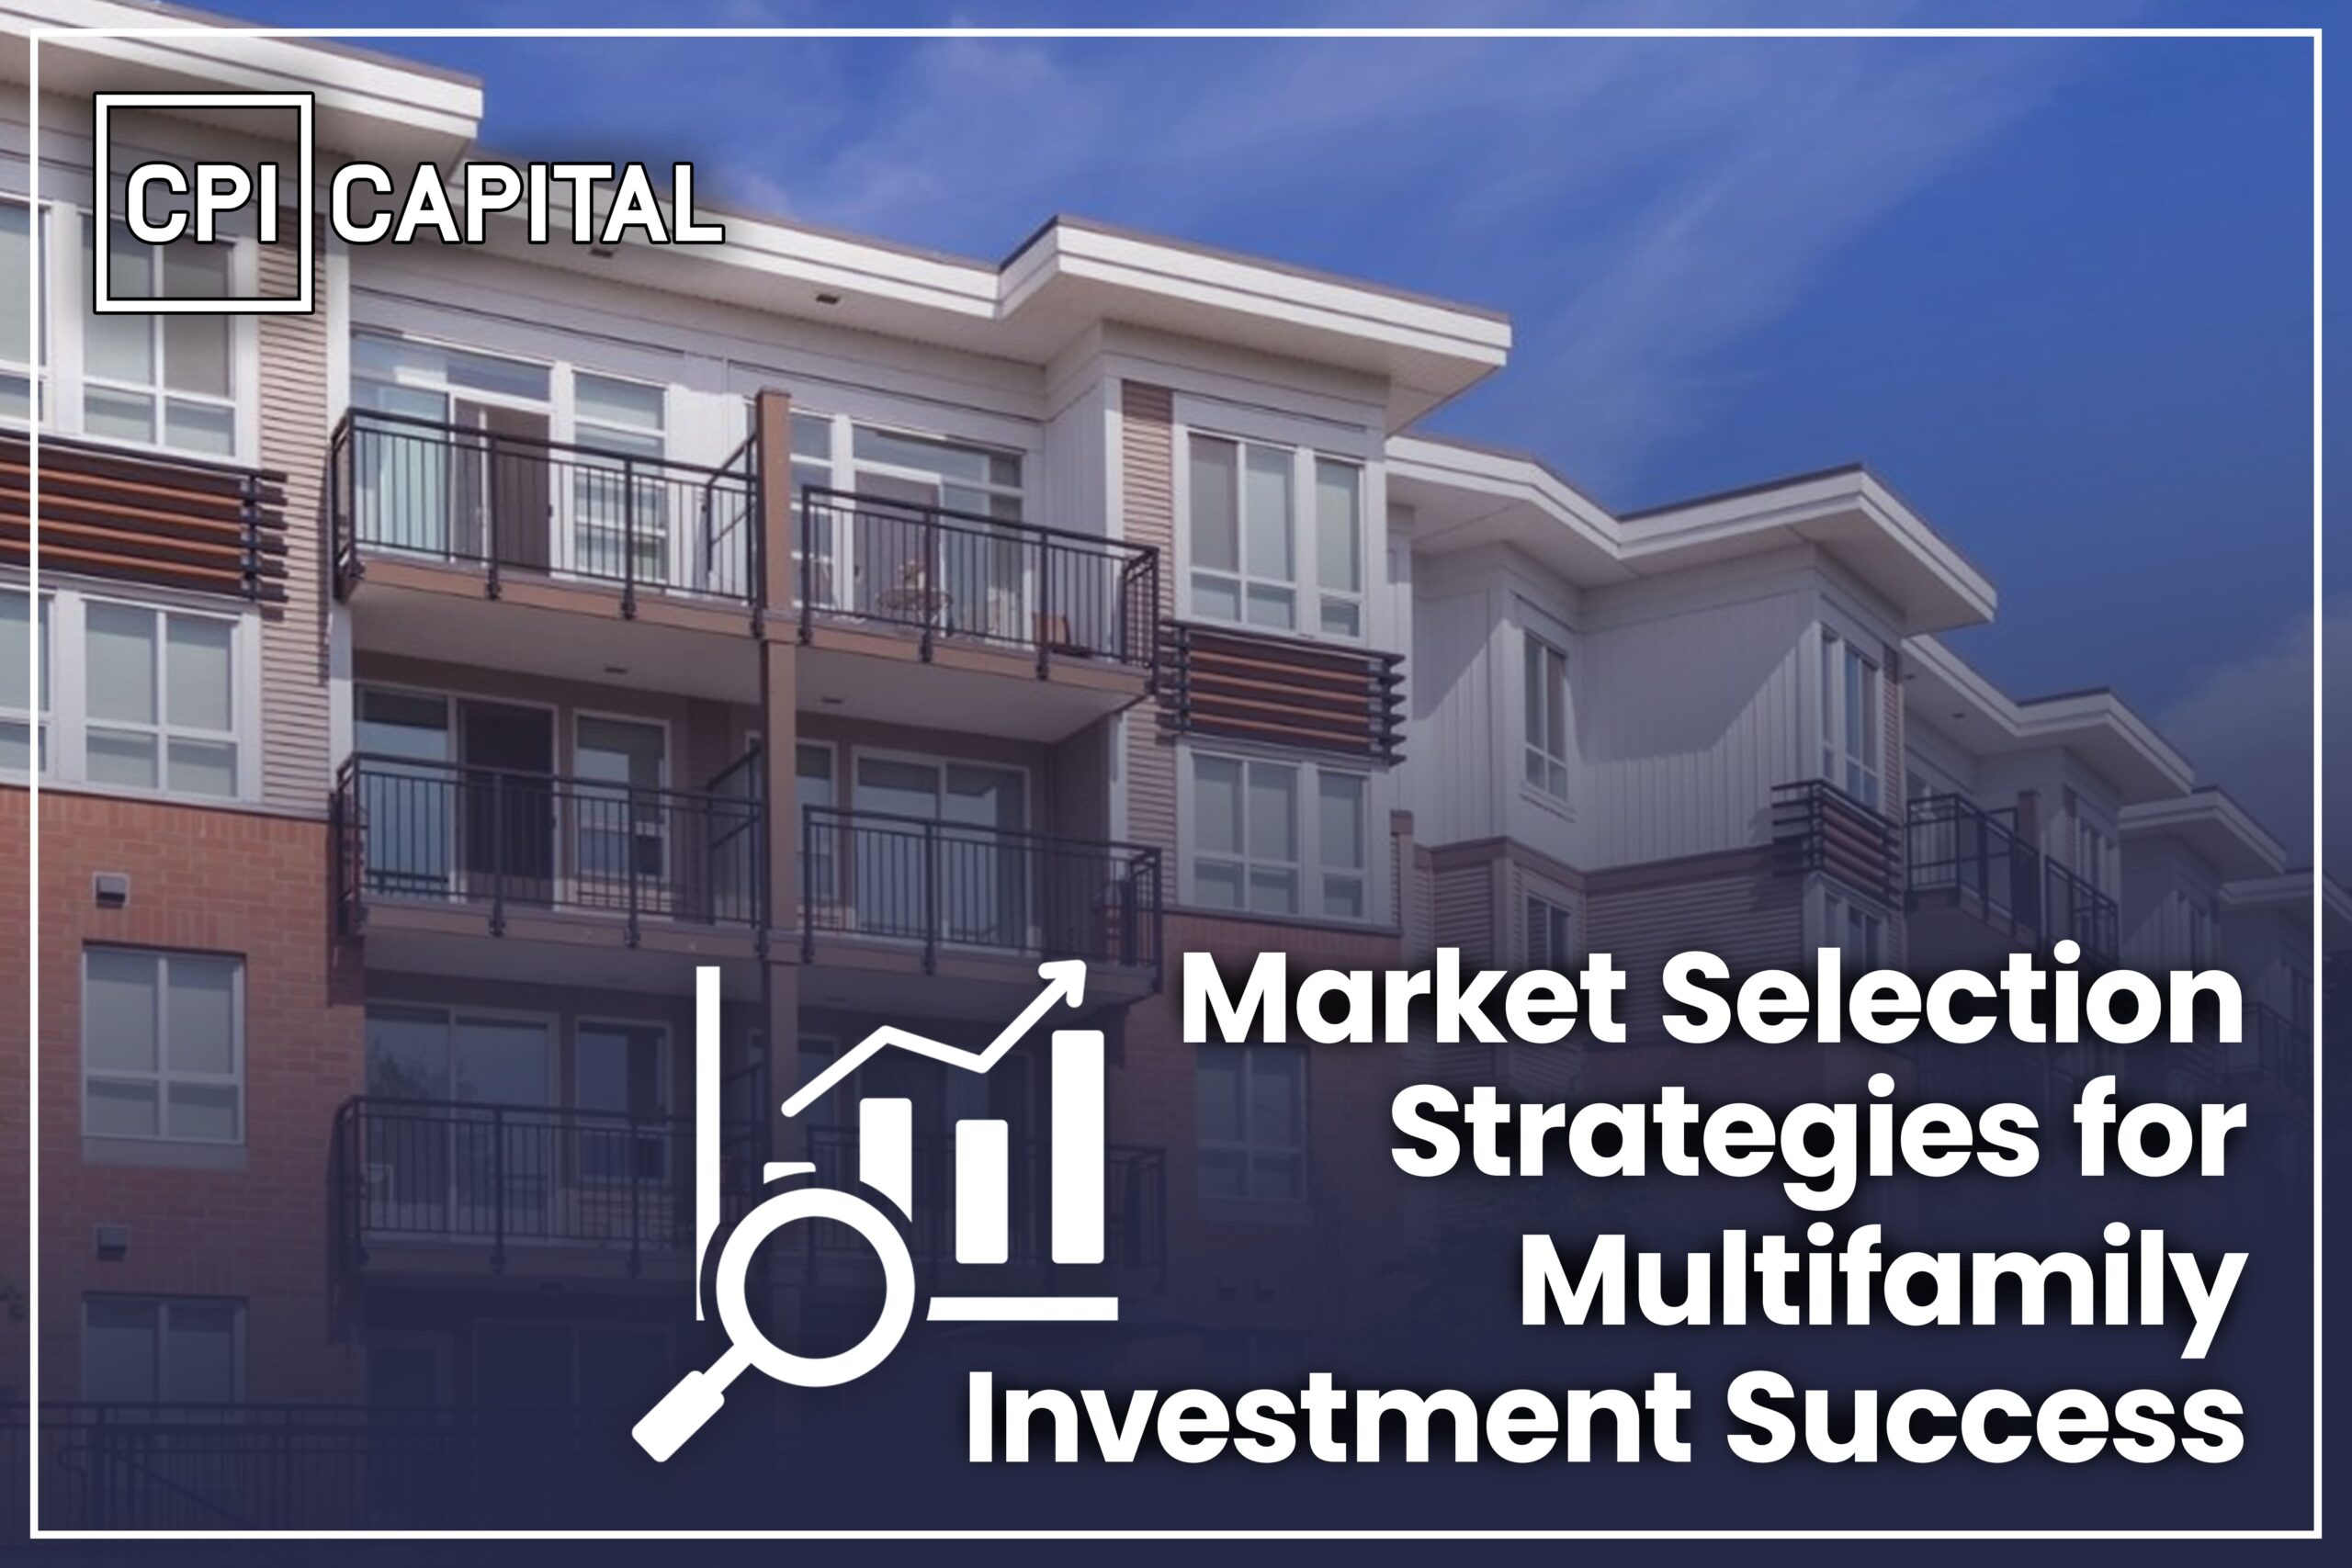 Market Selection Strategies for Multifamily Investment Success